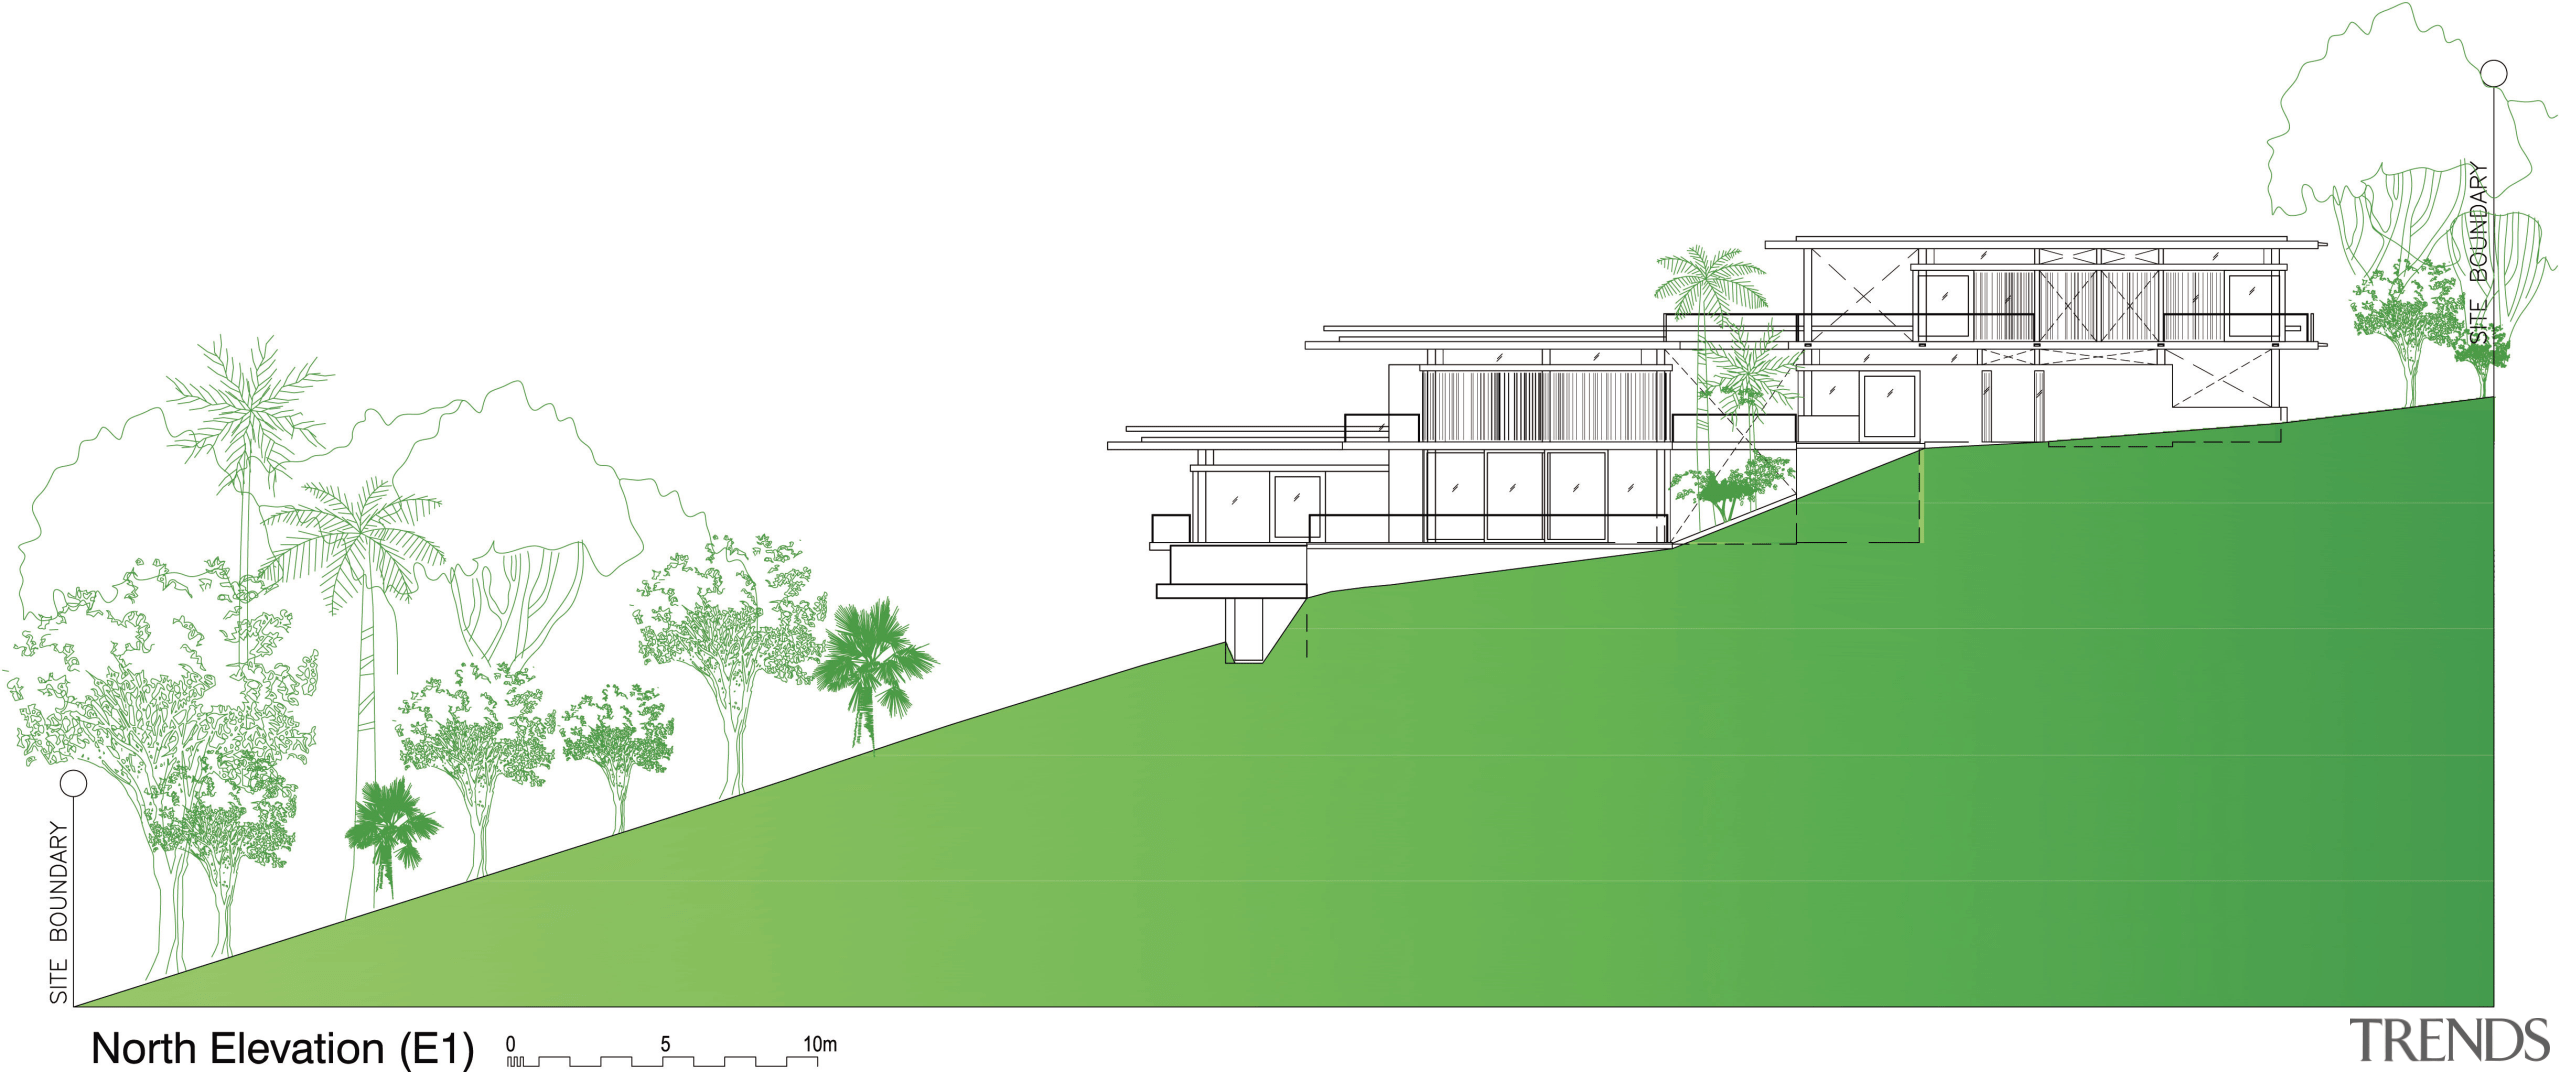 View of modern home designed by Design Unit architecture, area, diagram, elevation, energy, facade, grass, green, home, house, land lot, line, neighbourhood, plan, plant, product design, property, residential area, structure, tree, urban design, white, green